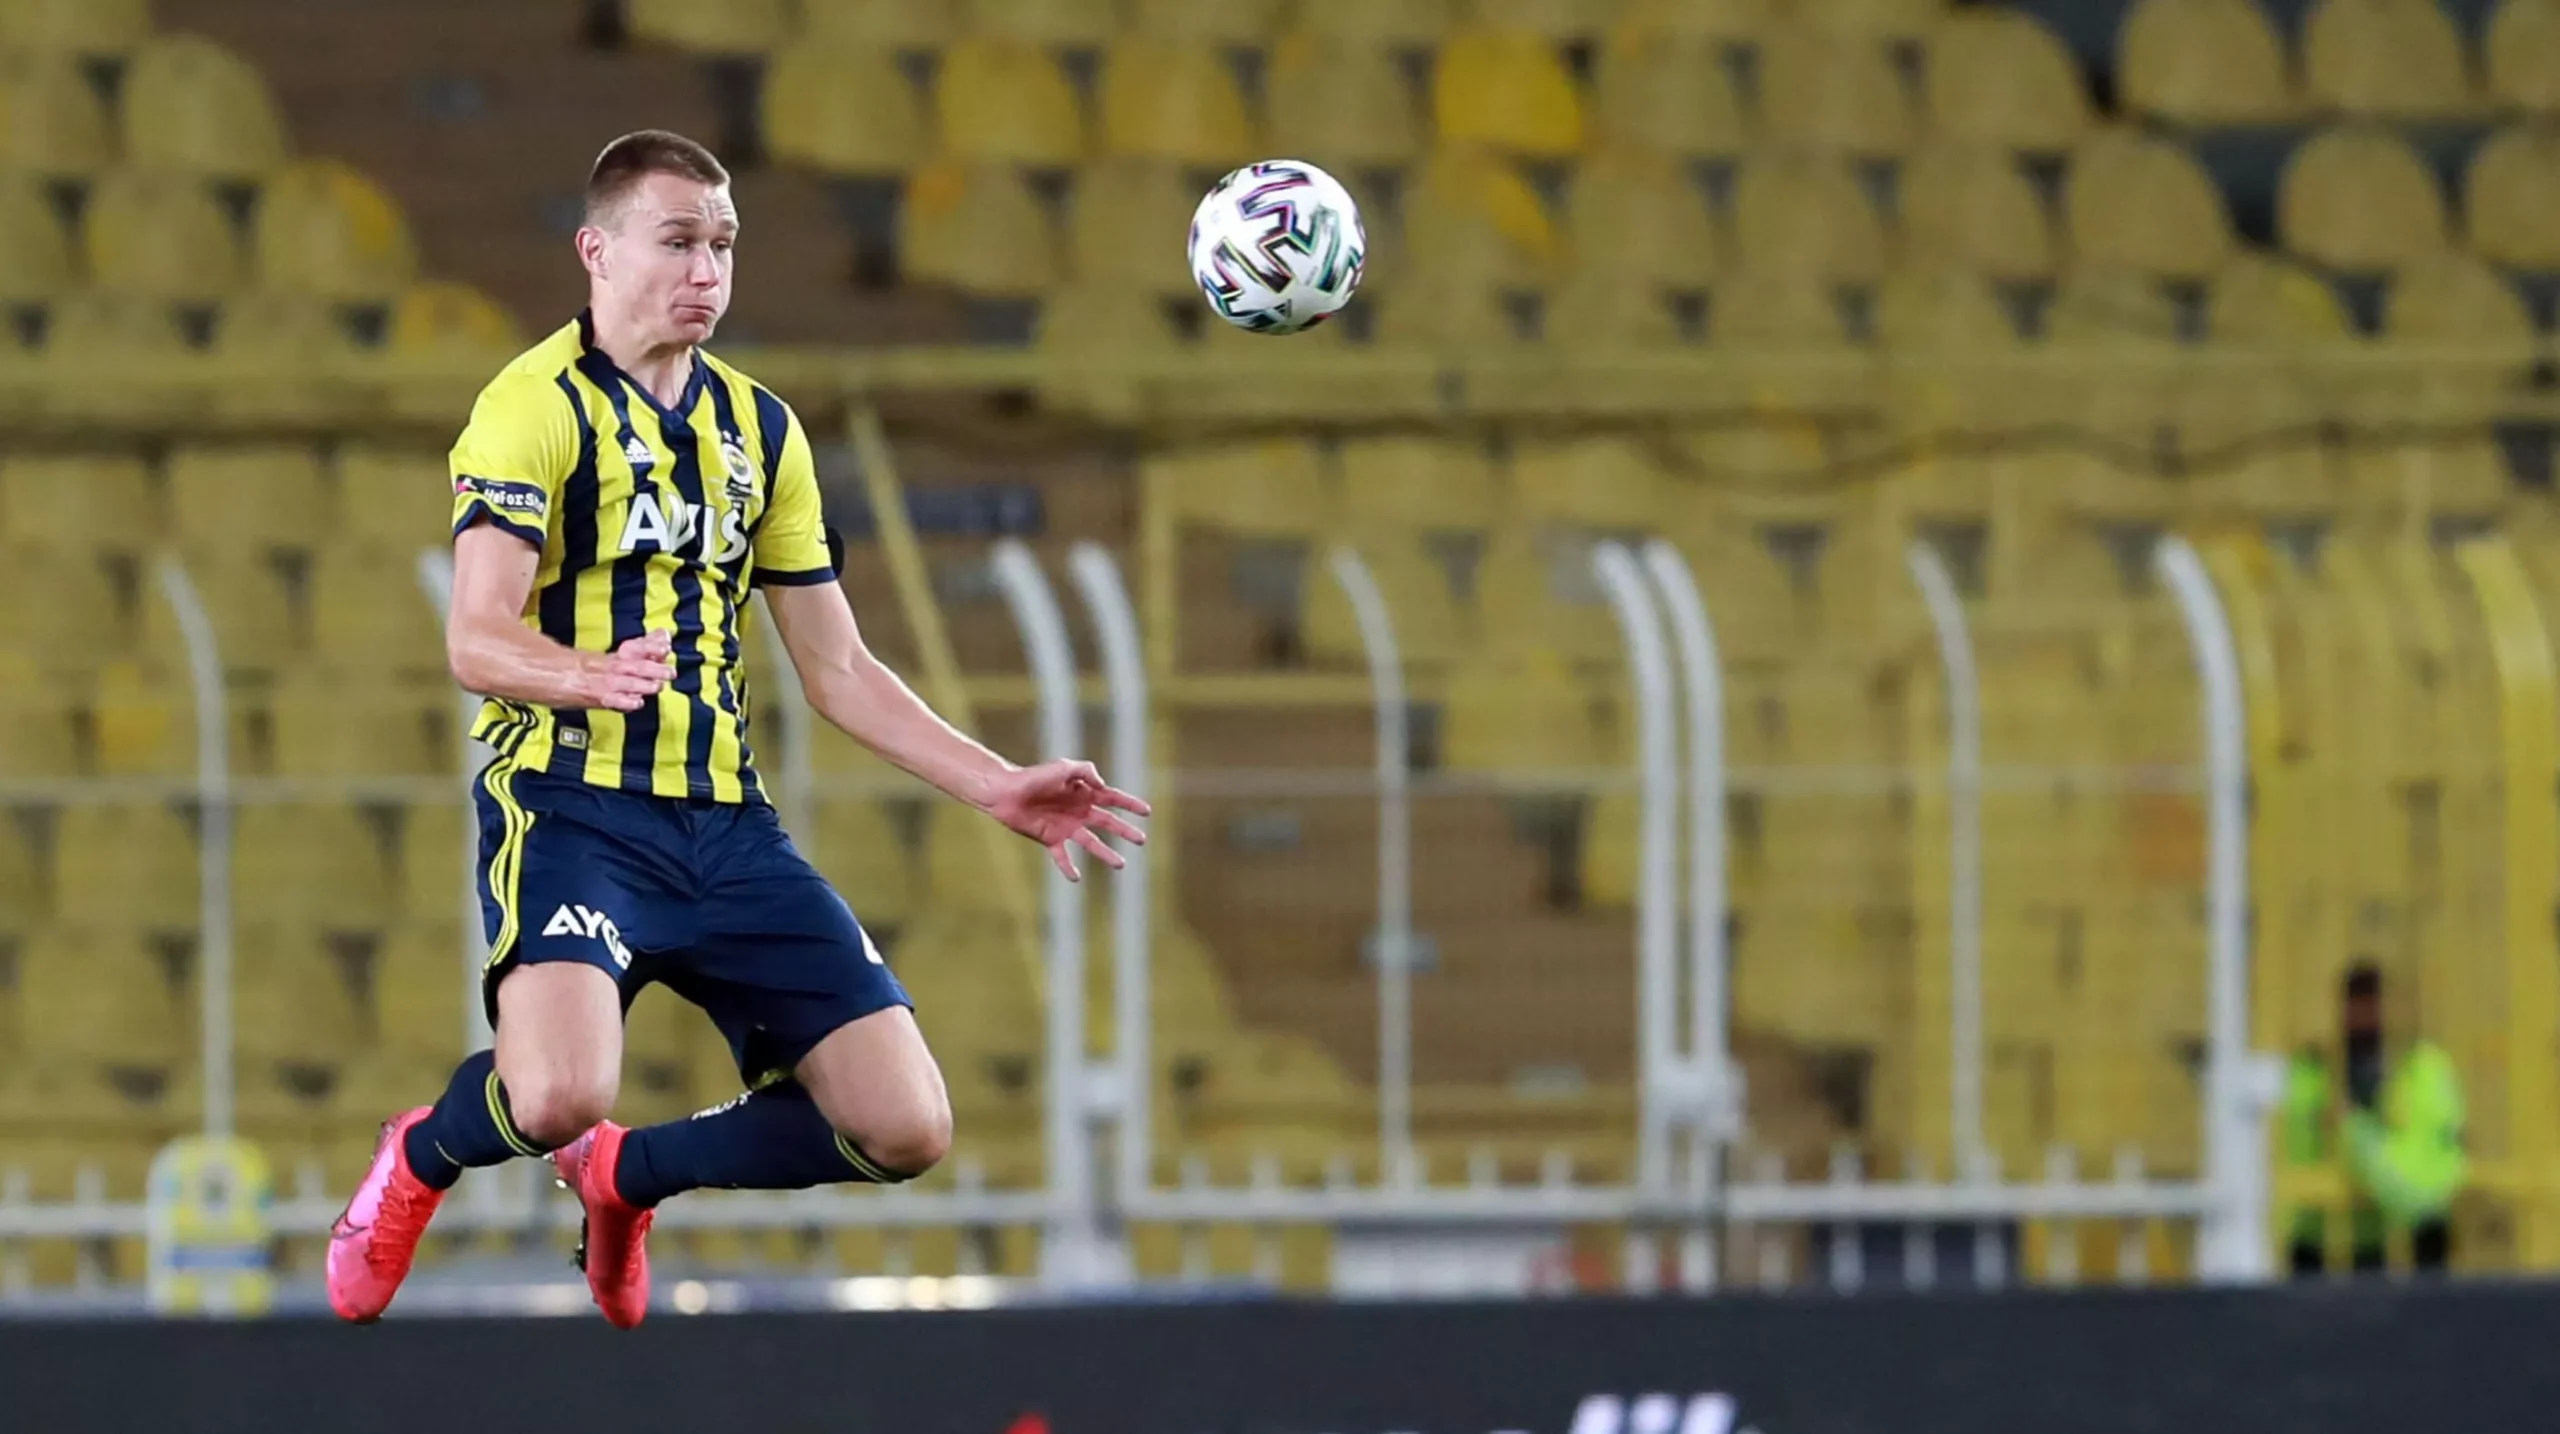 Hungary coach Marco Rossi reveals Fenerbahce ace Attila Szalai has already agreed to join Chelsea.